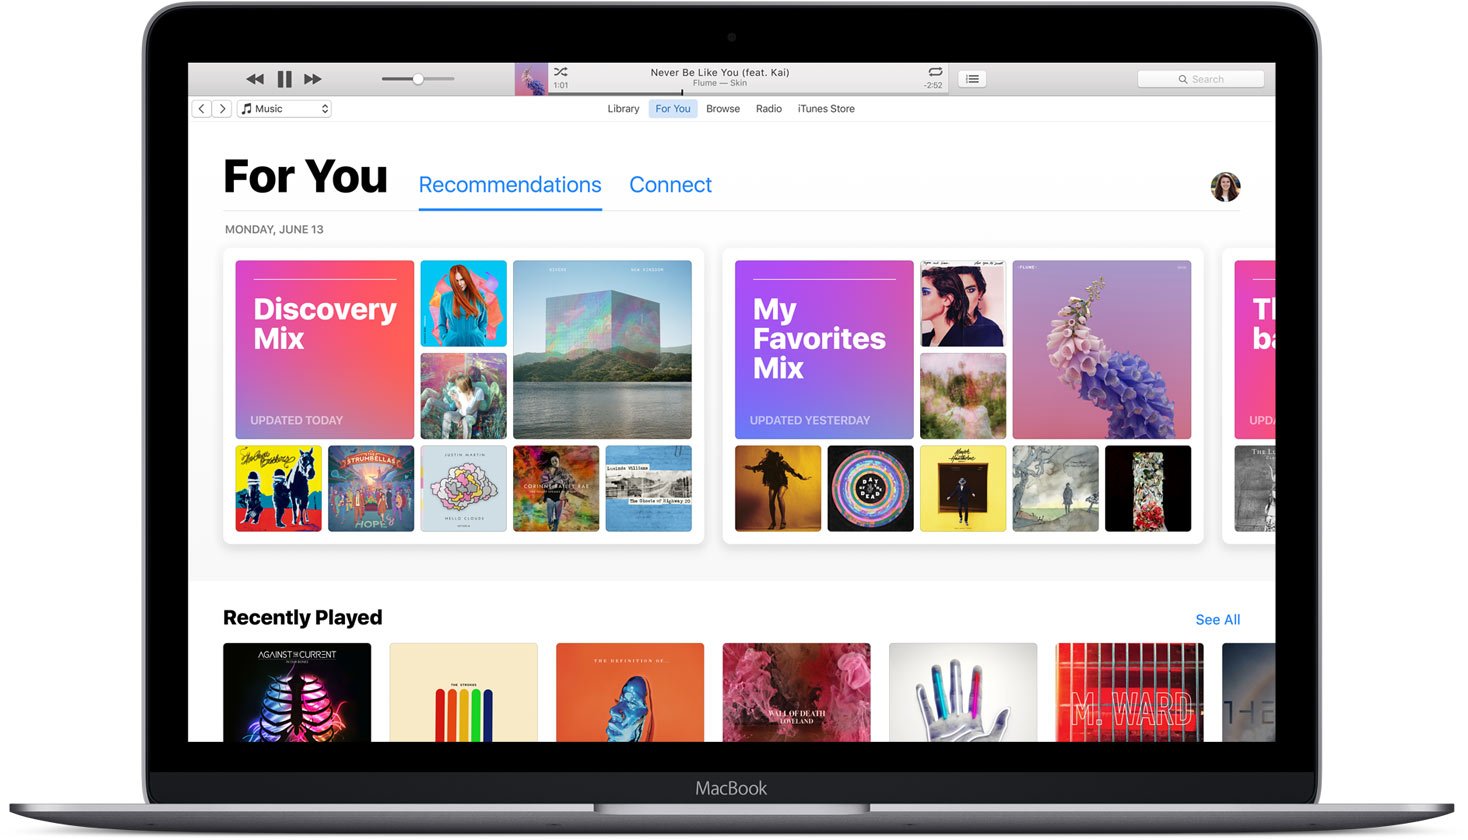 What to expect from Apple Music in iOS 10 and macOS Sierra